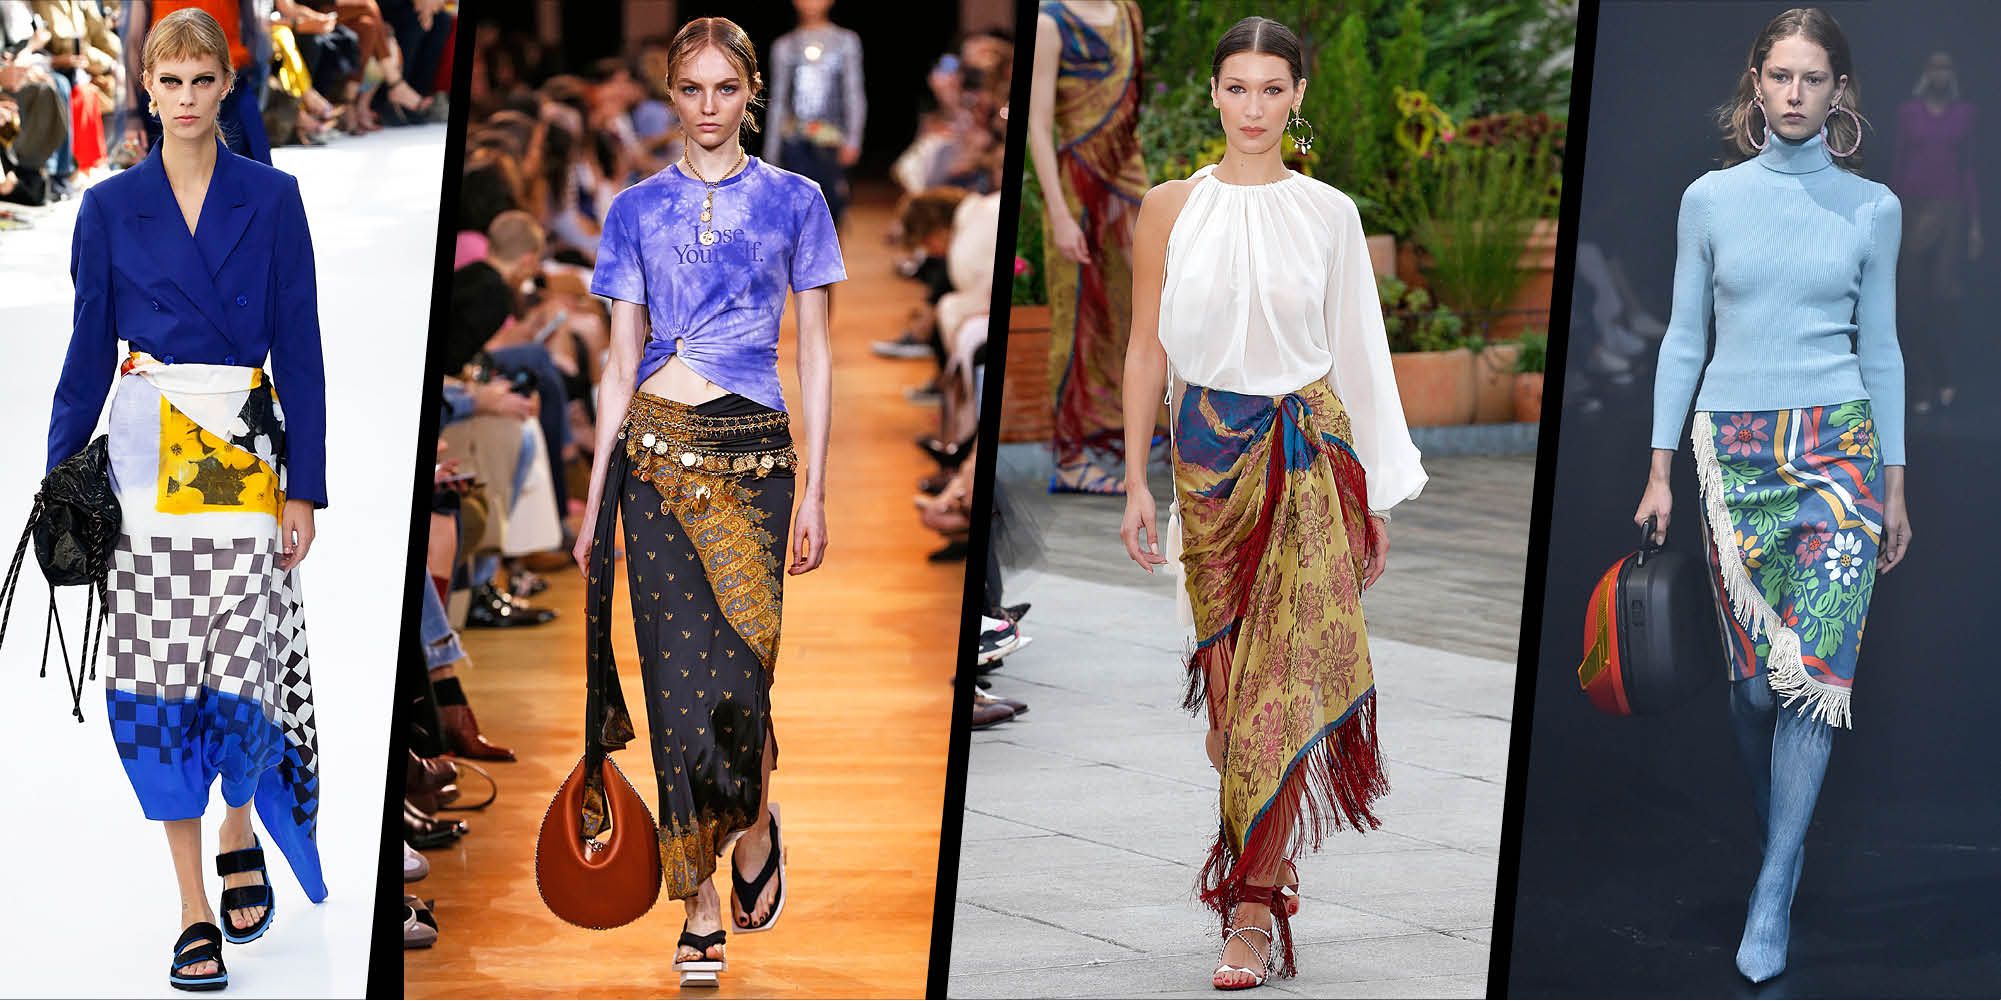 Sarongs make a return, and this time they're headed for the city